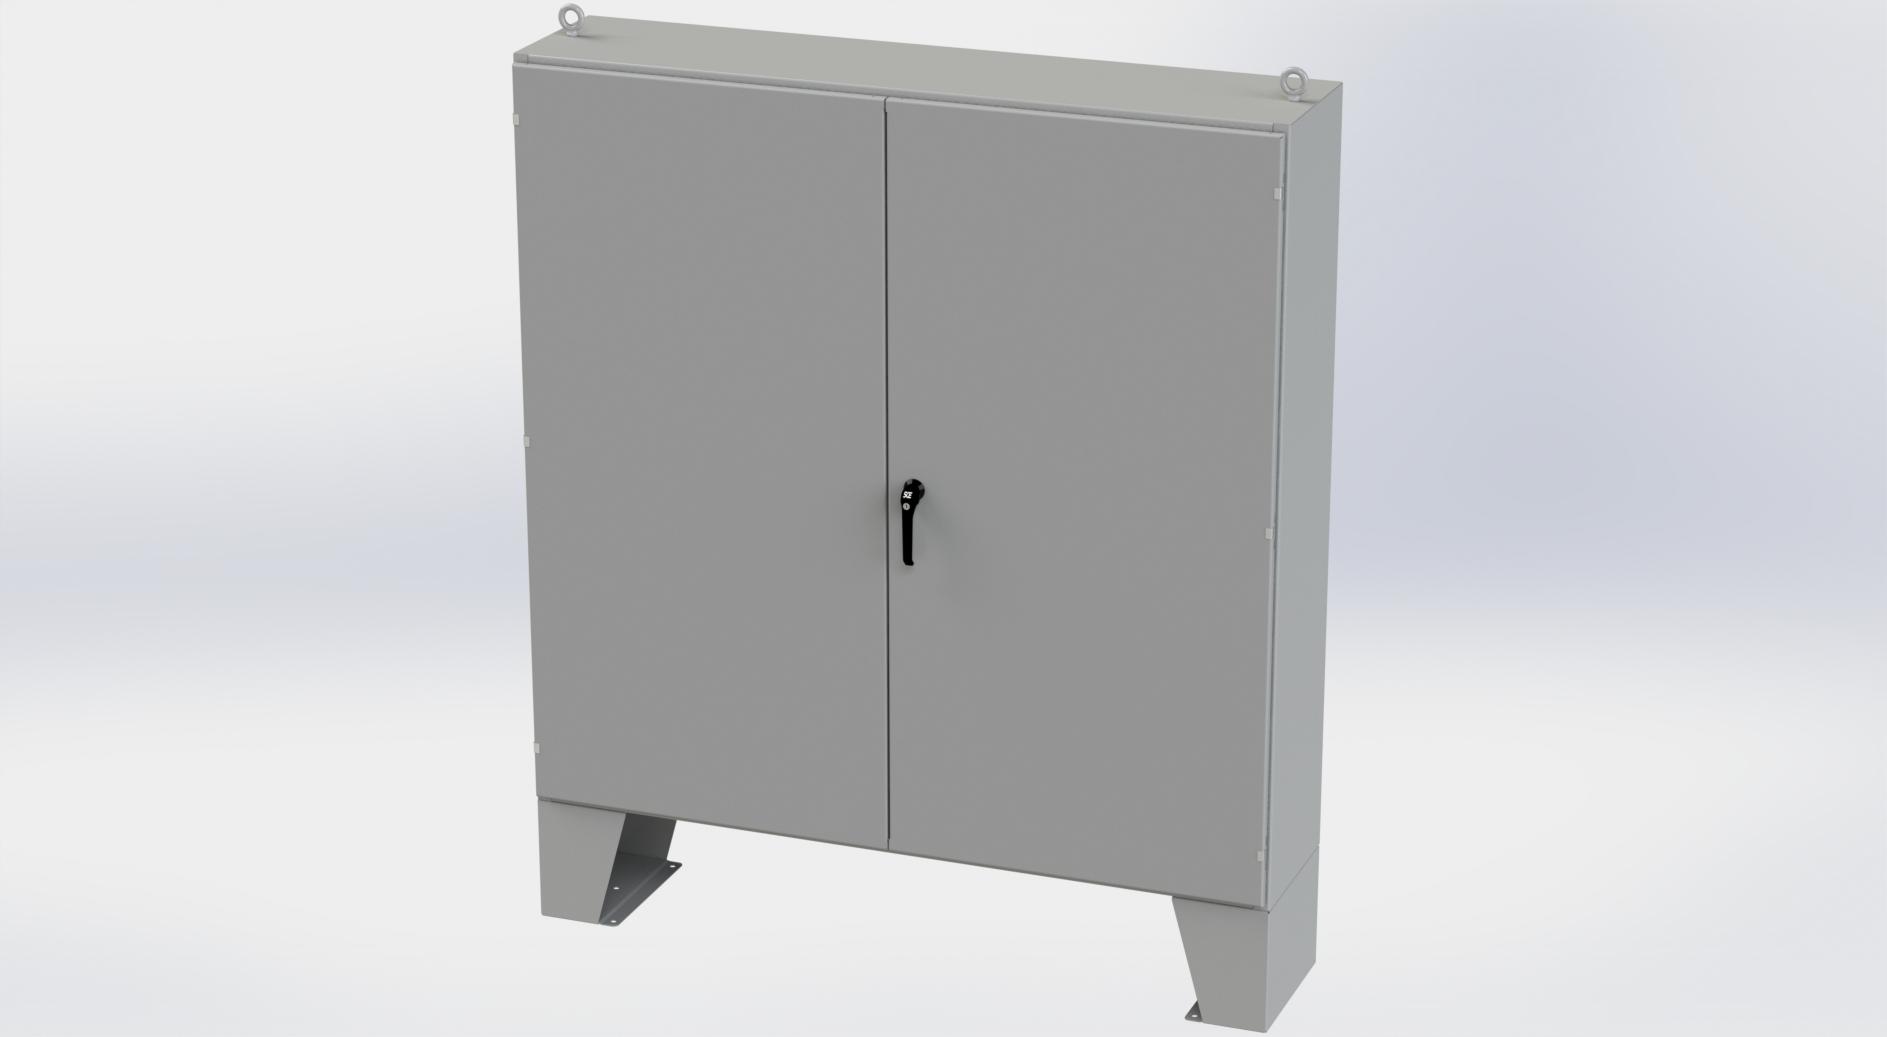 Saginaw Control SCE-727216ULP 2DR LP Enclosure, Height:72.00", Width:72.00", Depth:16.00", ANSI-61 gray powder coating inside and out. Optional sub-panels are powder coated white.